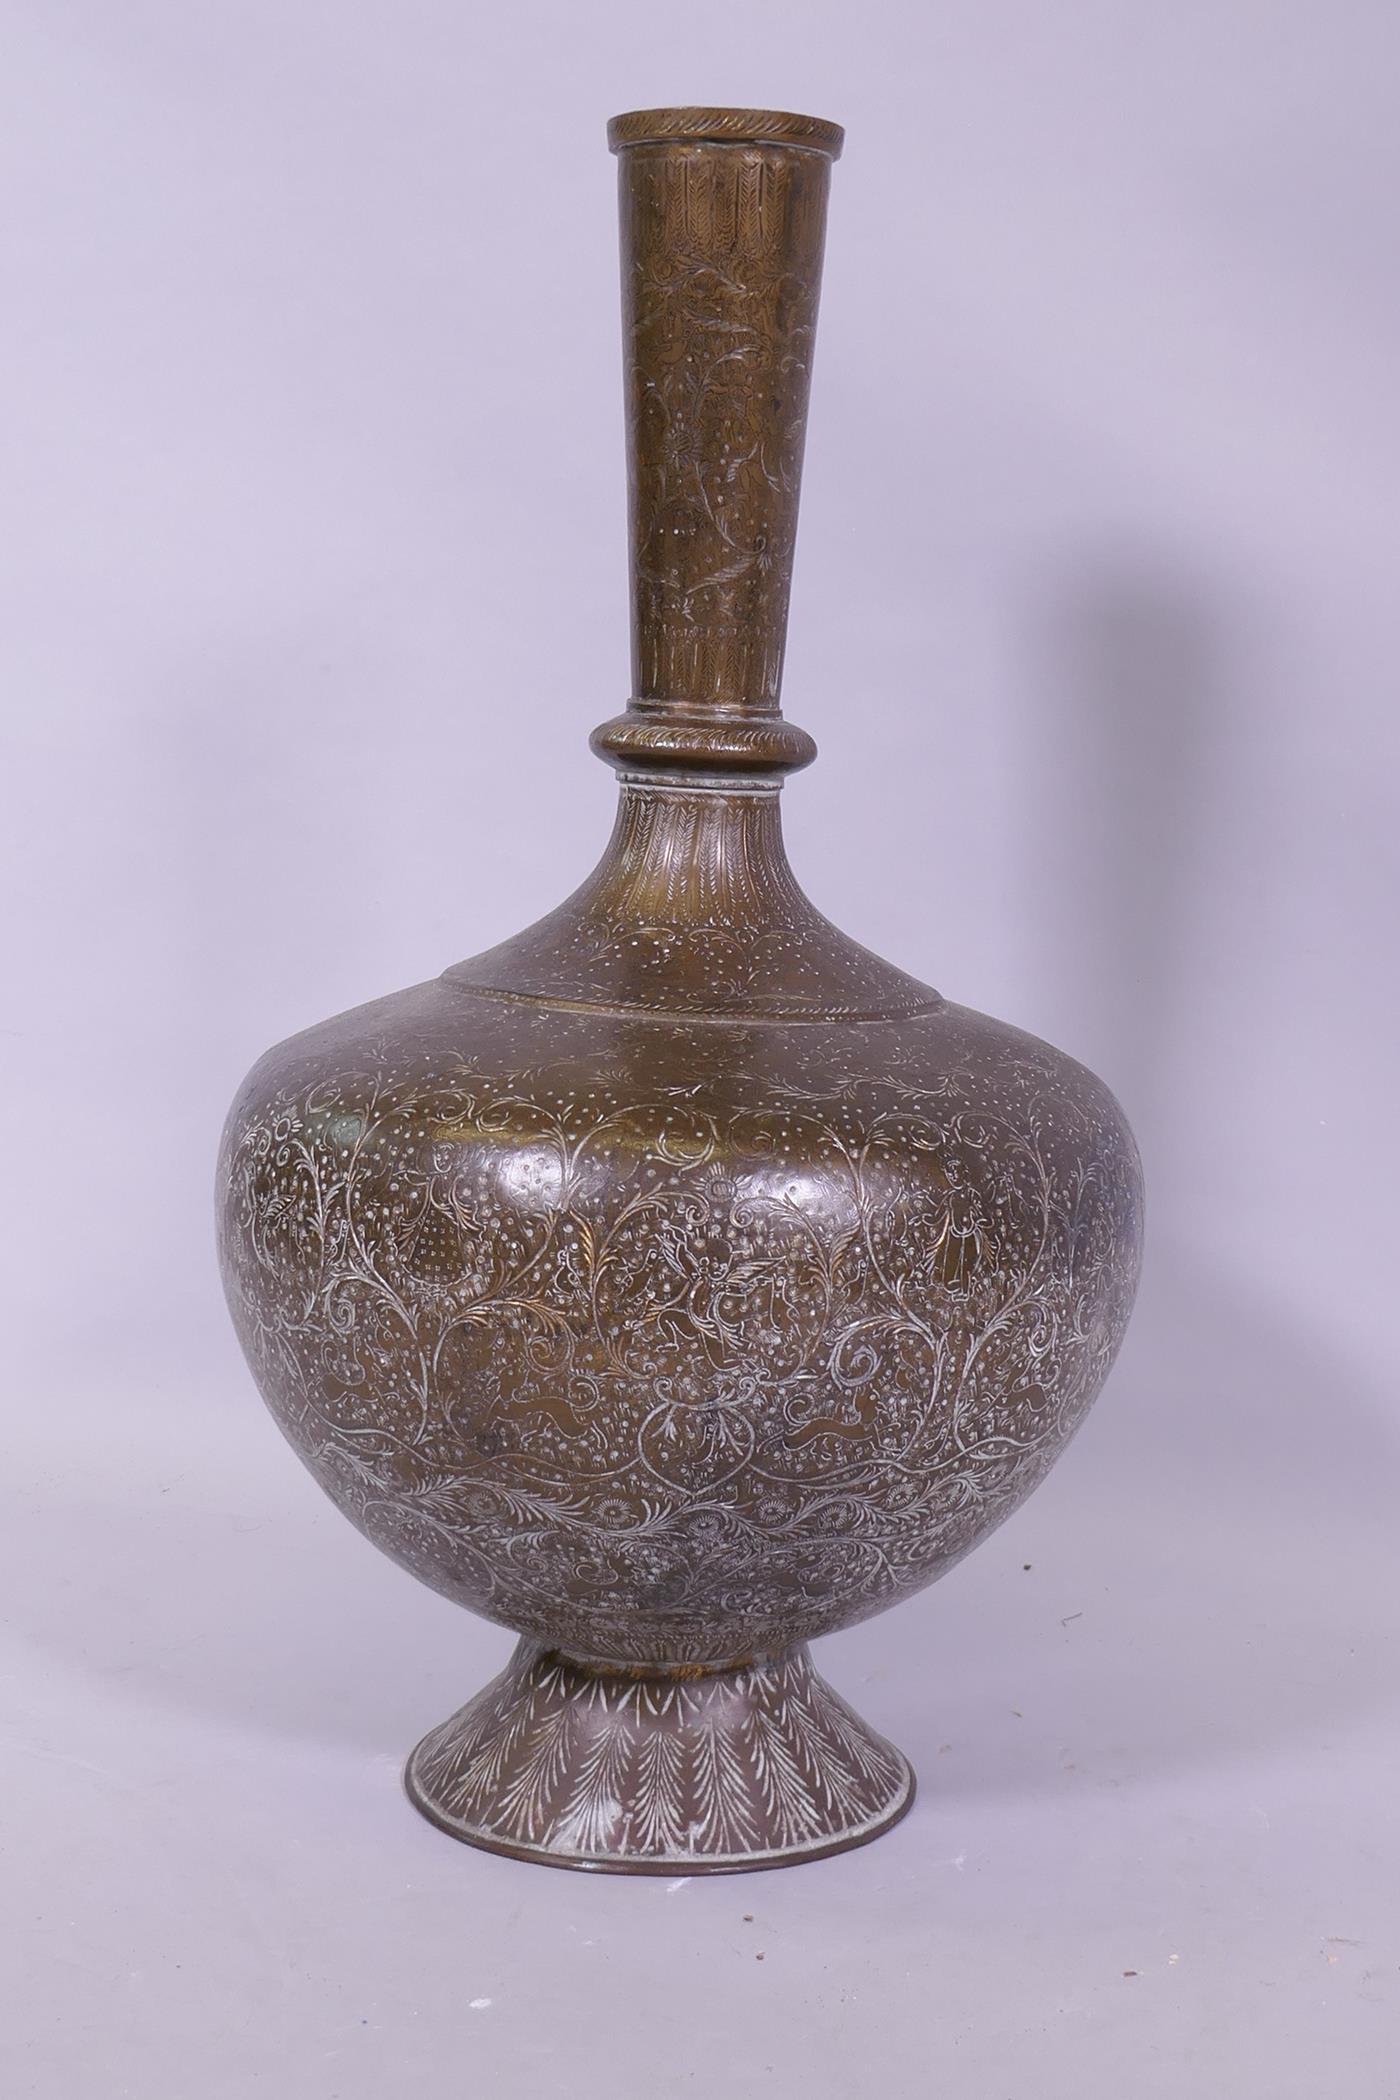 An antique Indian brass vase with engraved decoration of scrolling foliate designs and figures - Image 2 of 7